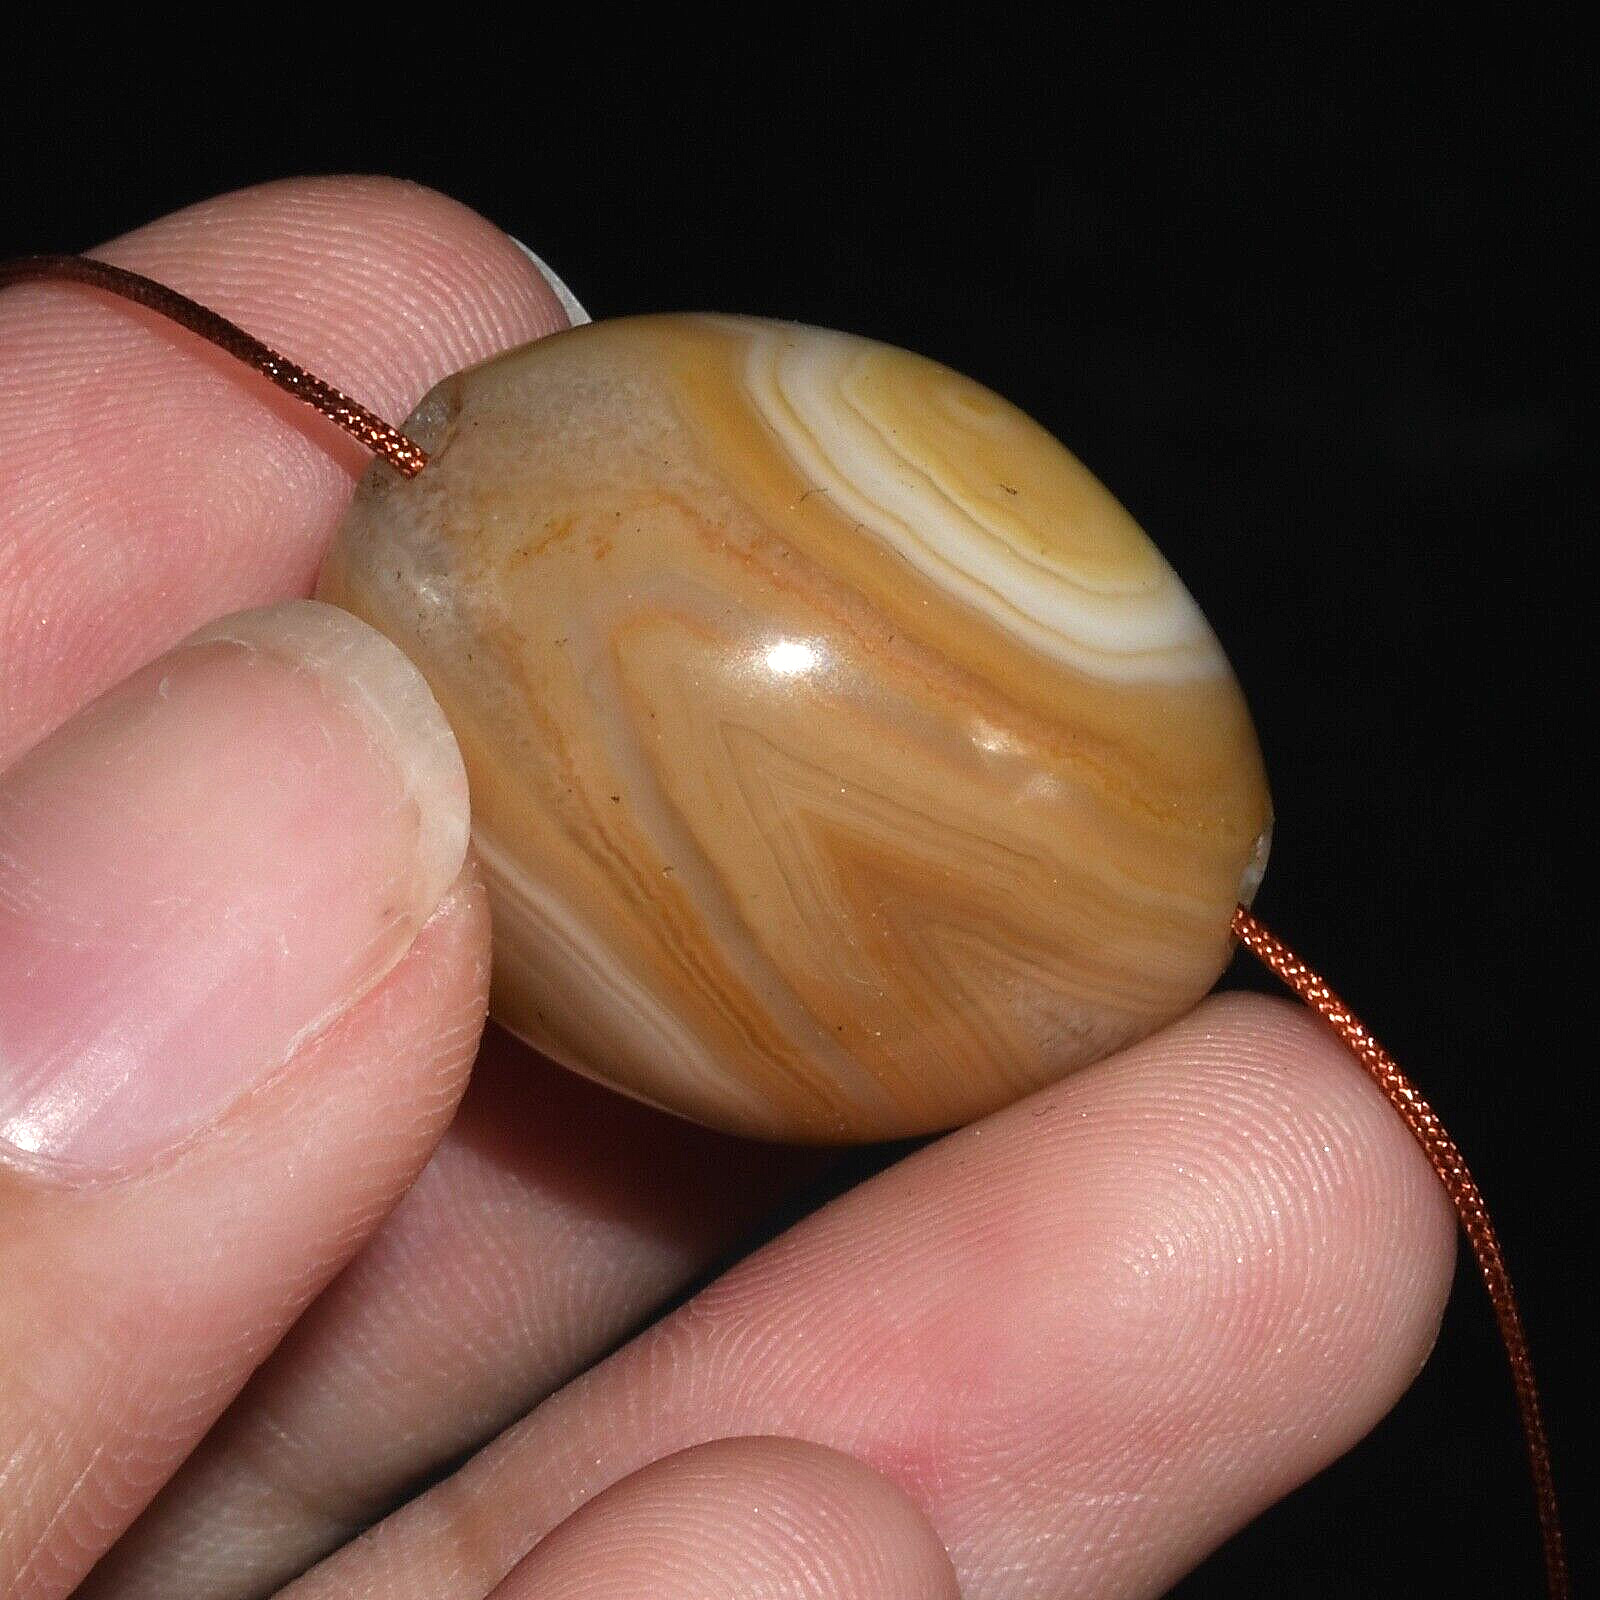 Authentic Ancient Rare Yellow Banded Agate Stone Bead over 2000 Years Old